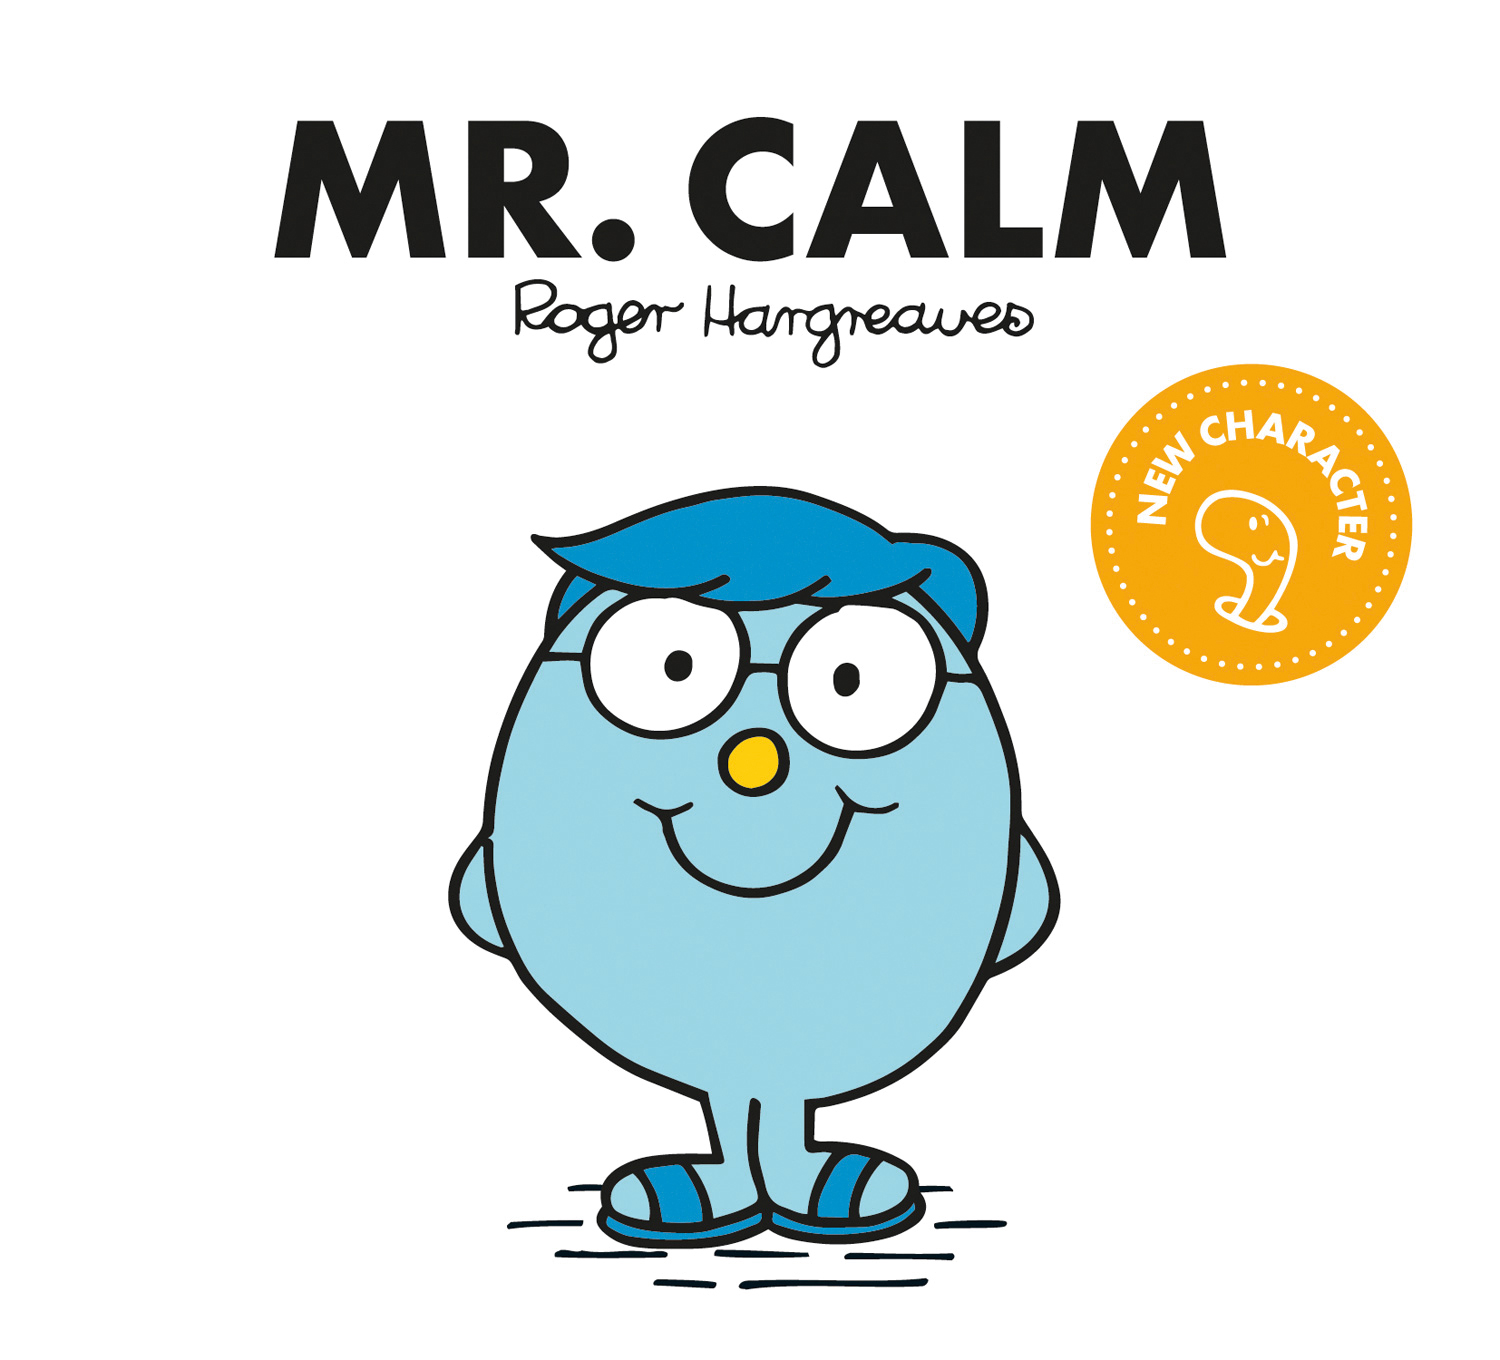 roger hargreaves biography